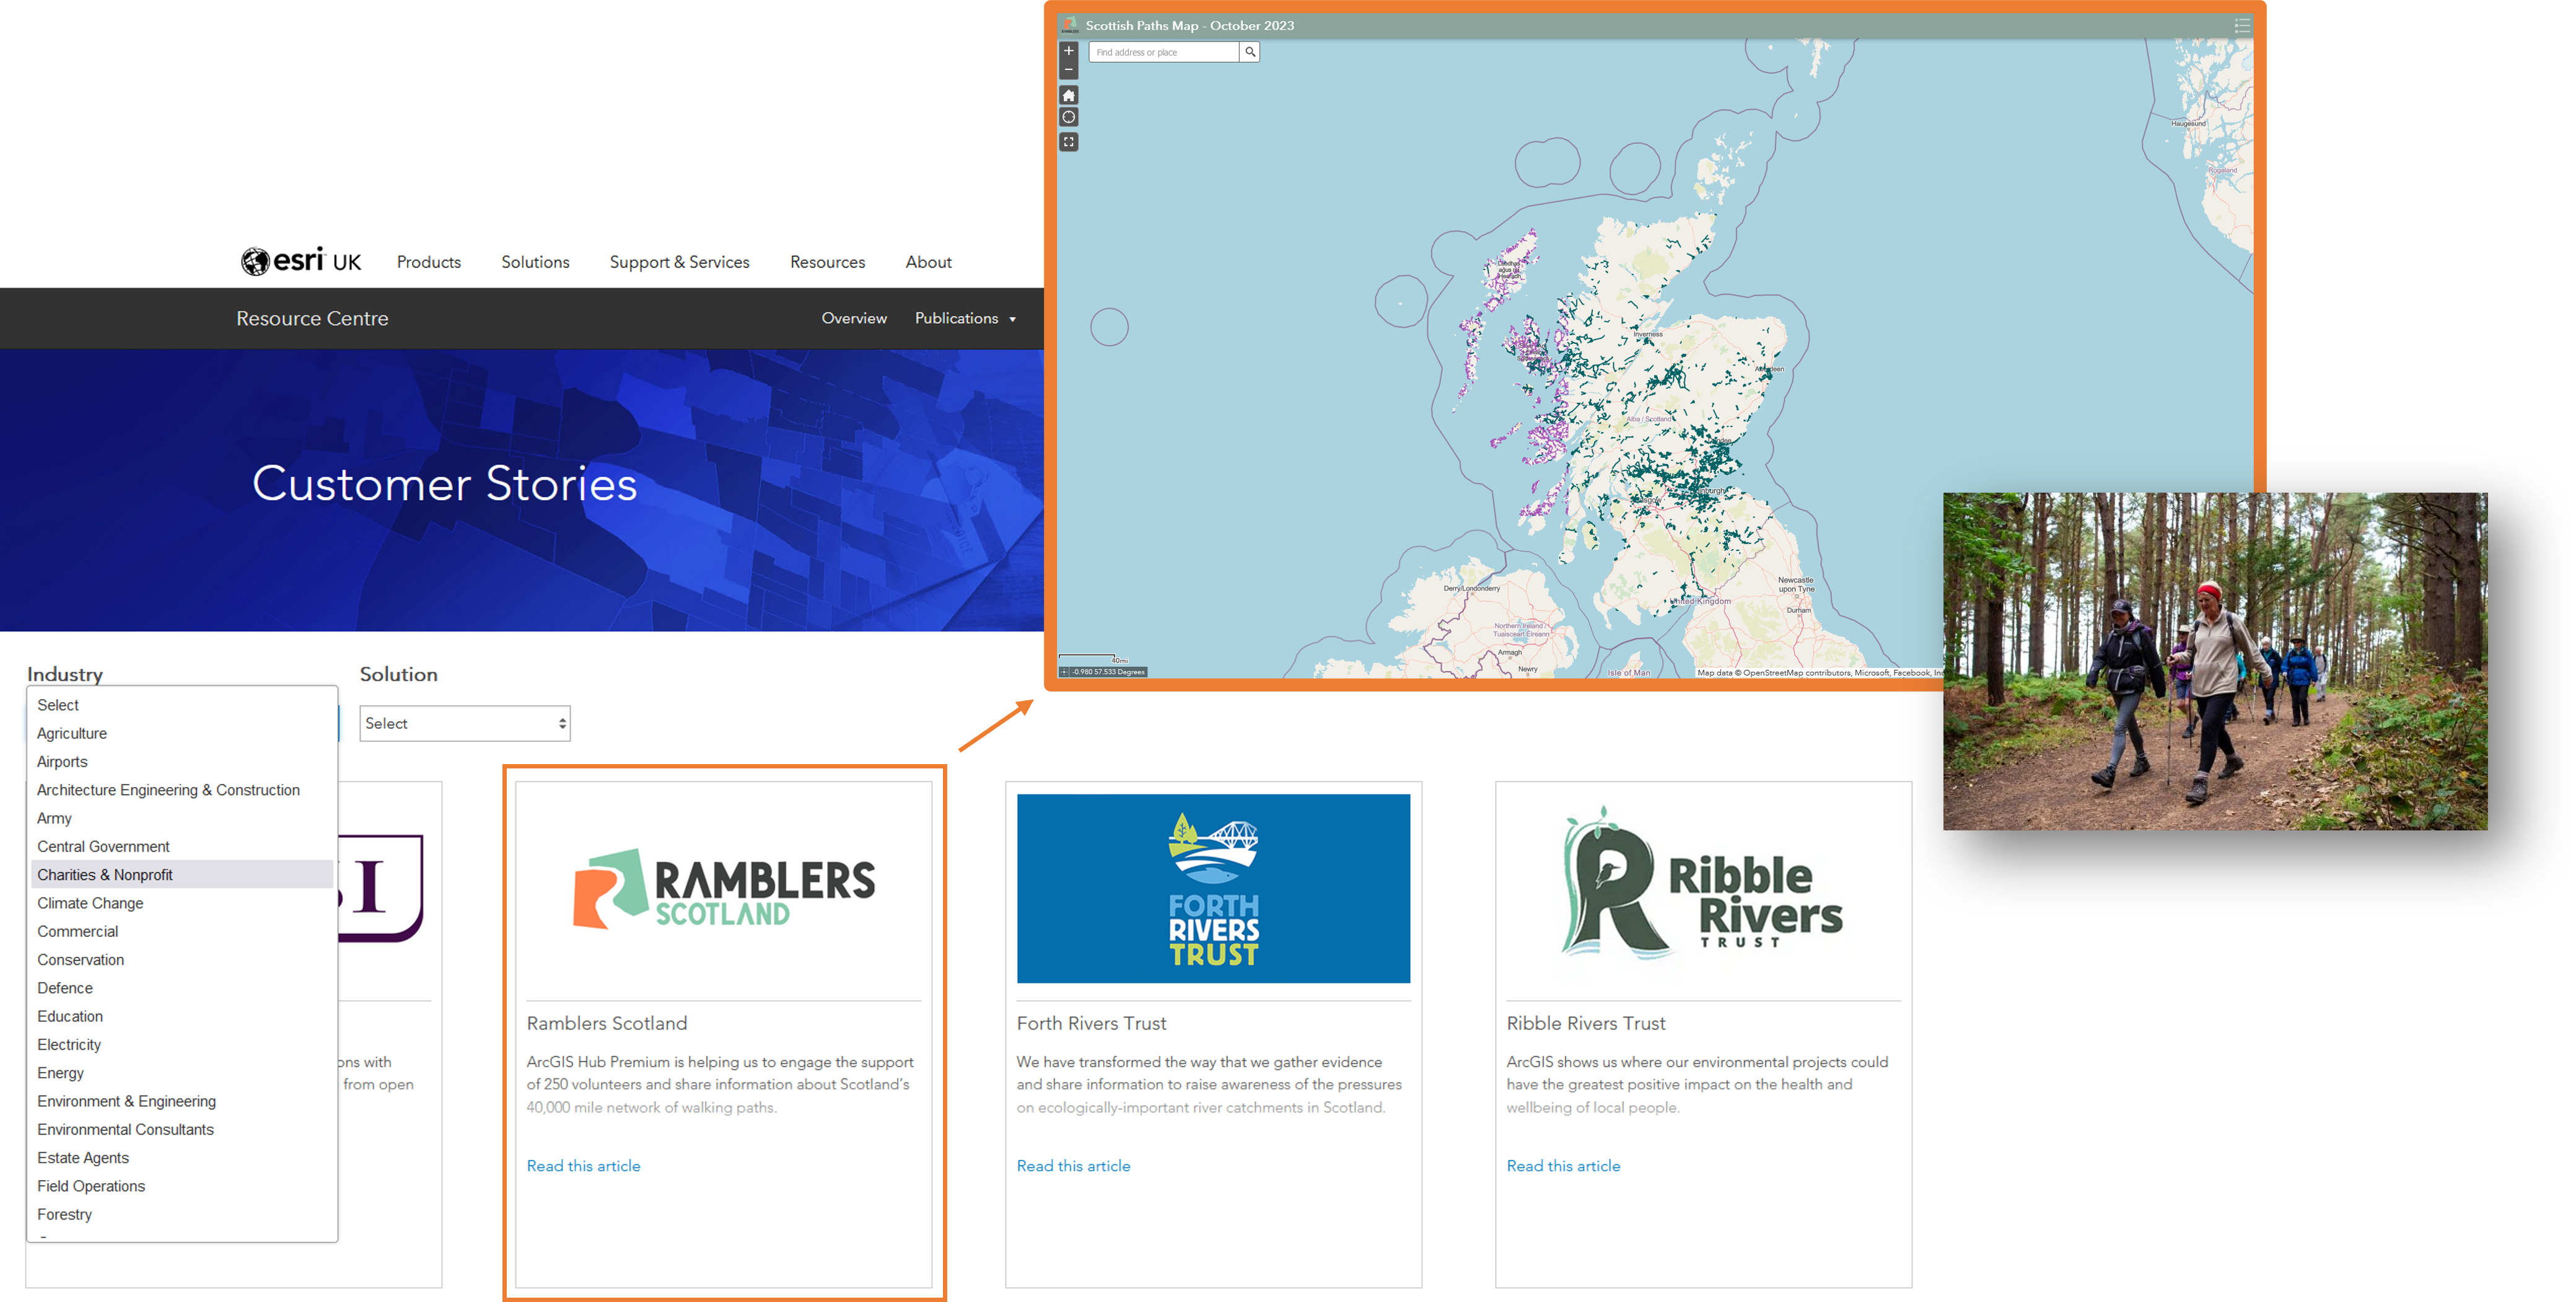 Customers stories page on Esri UK website, with orange border around Rambler's scotland, and a callout connected to their map of walk paths in Scotland. 